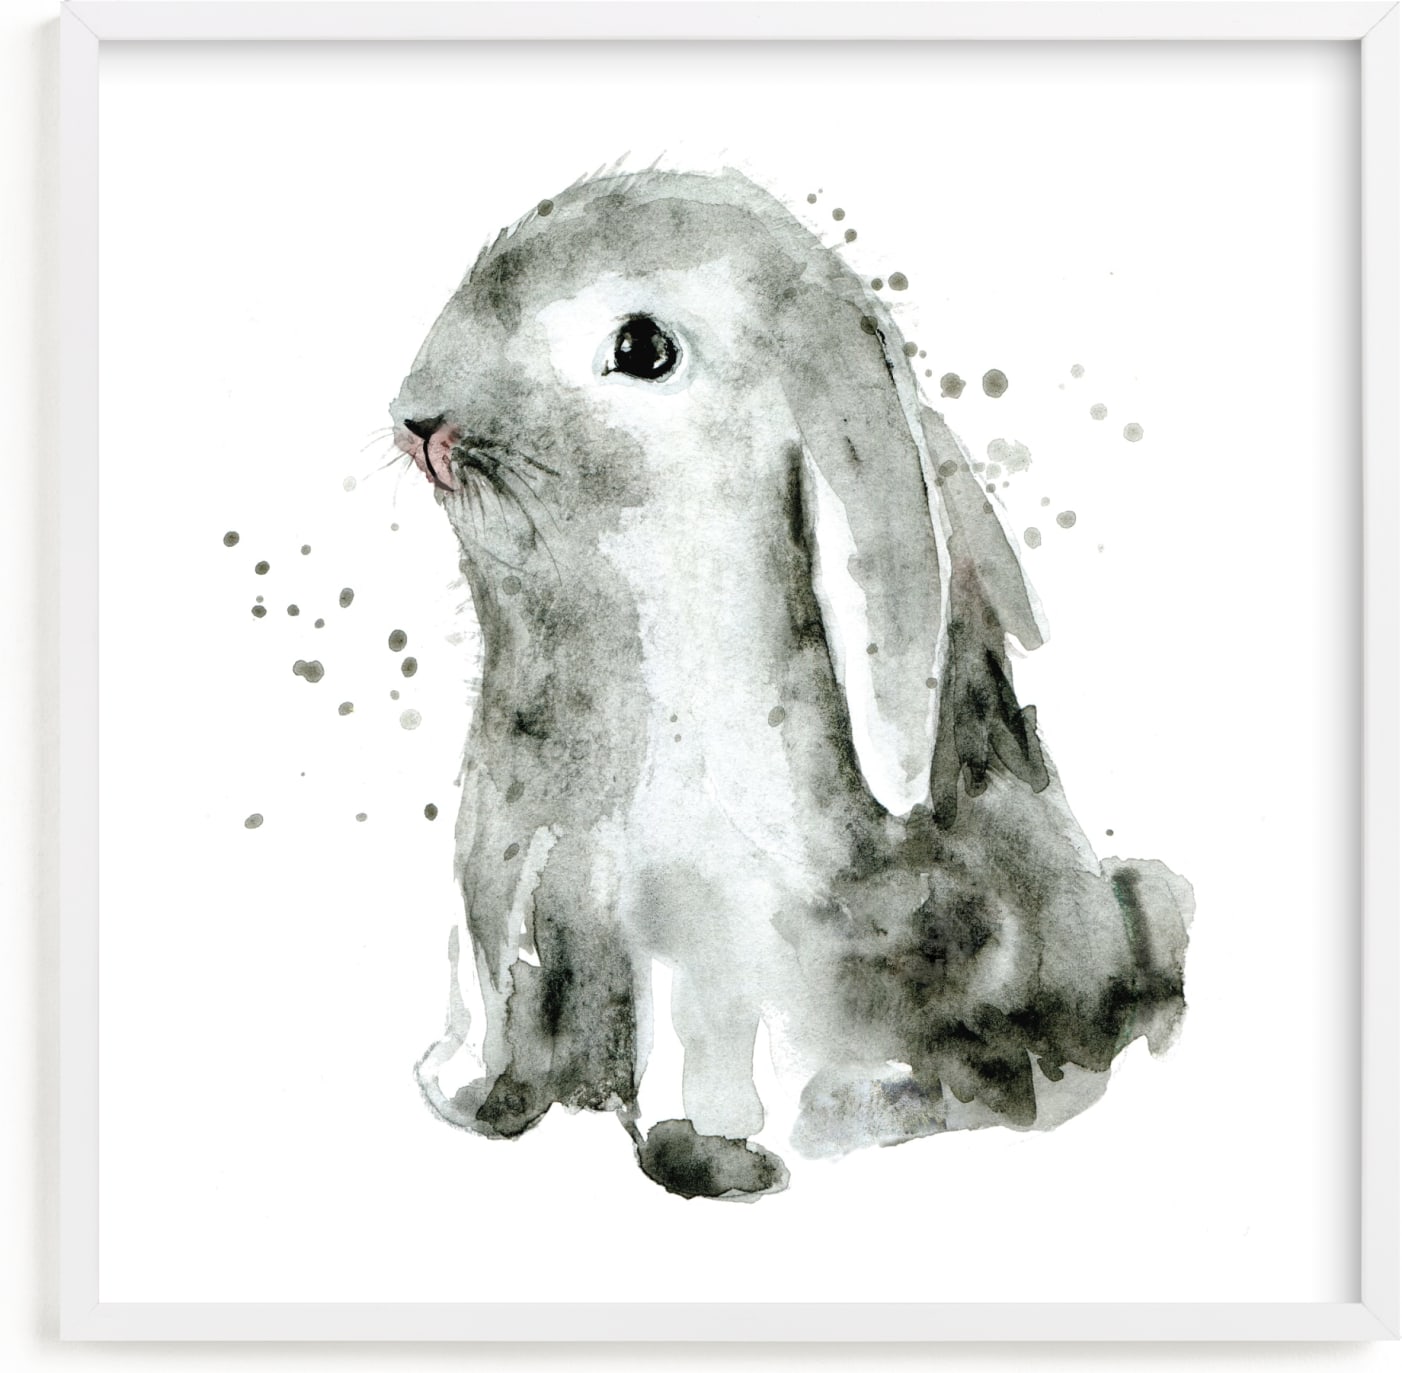 This is a white art by Lulaloo called Bunny1.